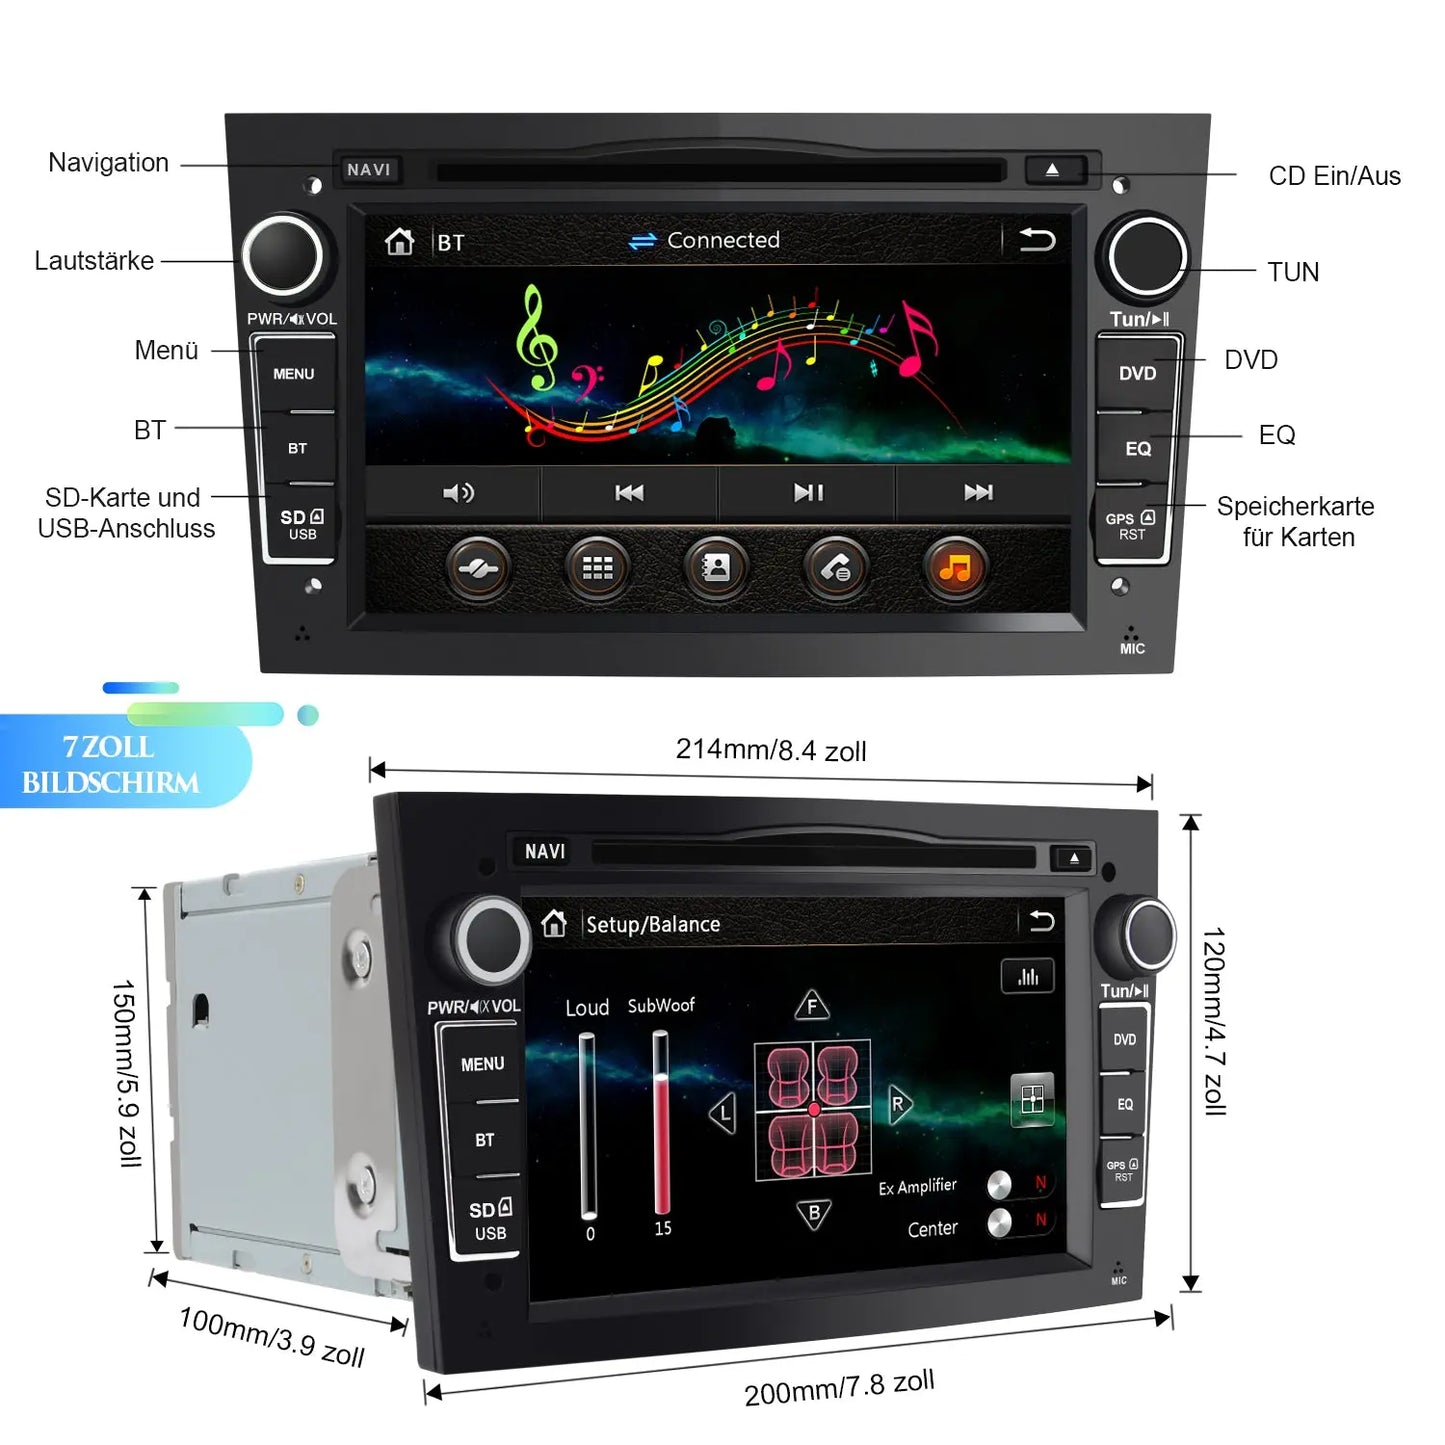 AWESAFE Car Radio 7 Inch with 2 DIN Touch Screen for Opel, Opel Autoradio with Bluetooth/GPS/FM/RDS/CD DVD/USB/SD, Support Steering Wheel Controls, Mirrorlink and Parking （black） AWESAFE